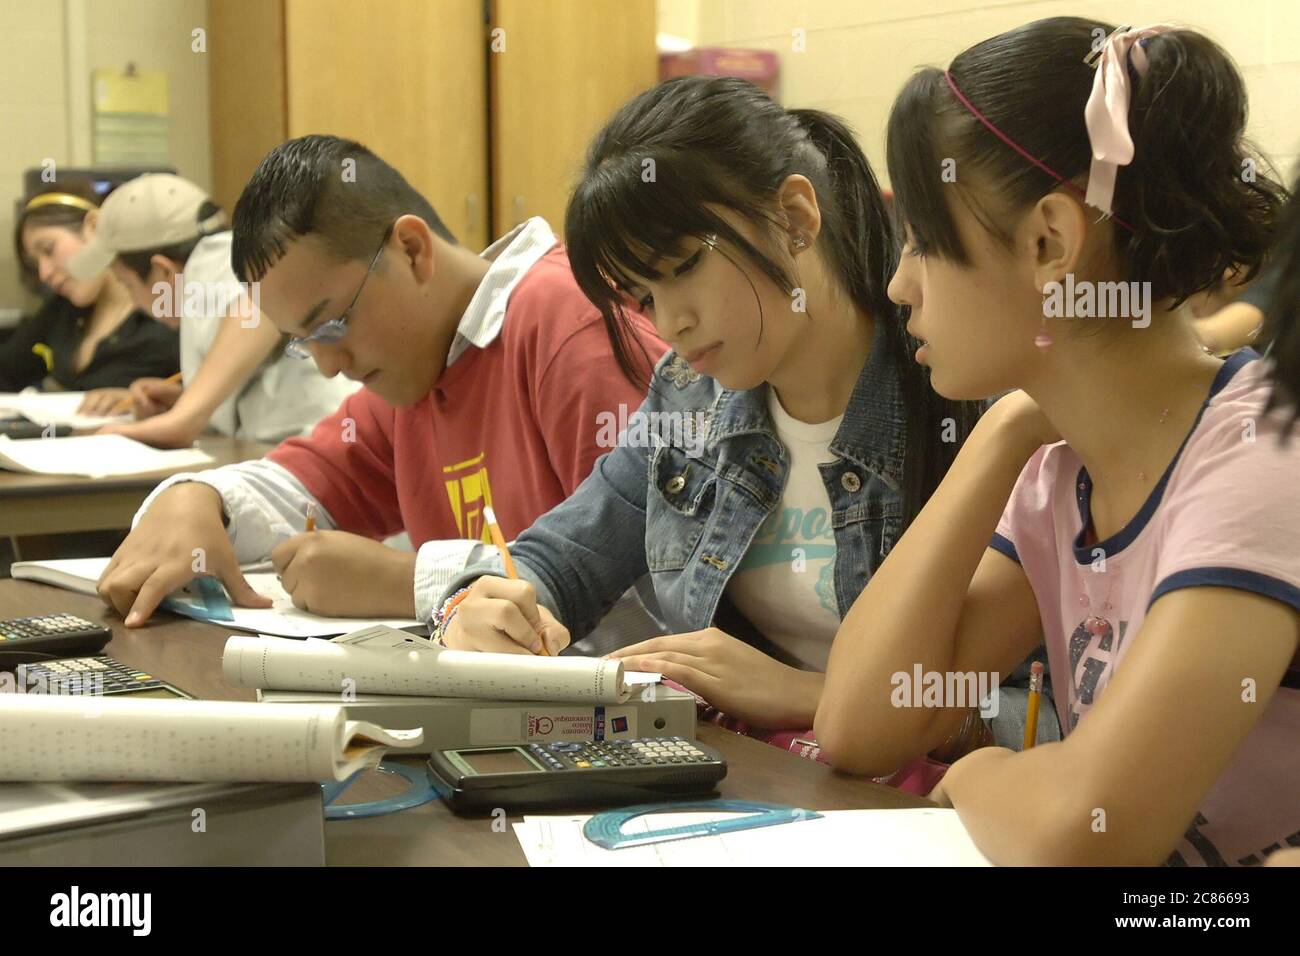 Brownsville, Texas USA, December 2 2005: Students at Lopez High School work on math problems in Algebra II classroom using hand-held scientific calculators. The student population of Lopez HS is over 99% Hispanic.  ©Bob Daemmrich Stock Photo